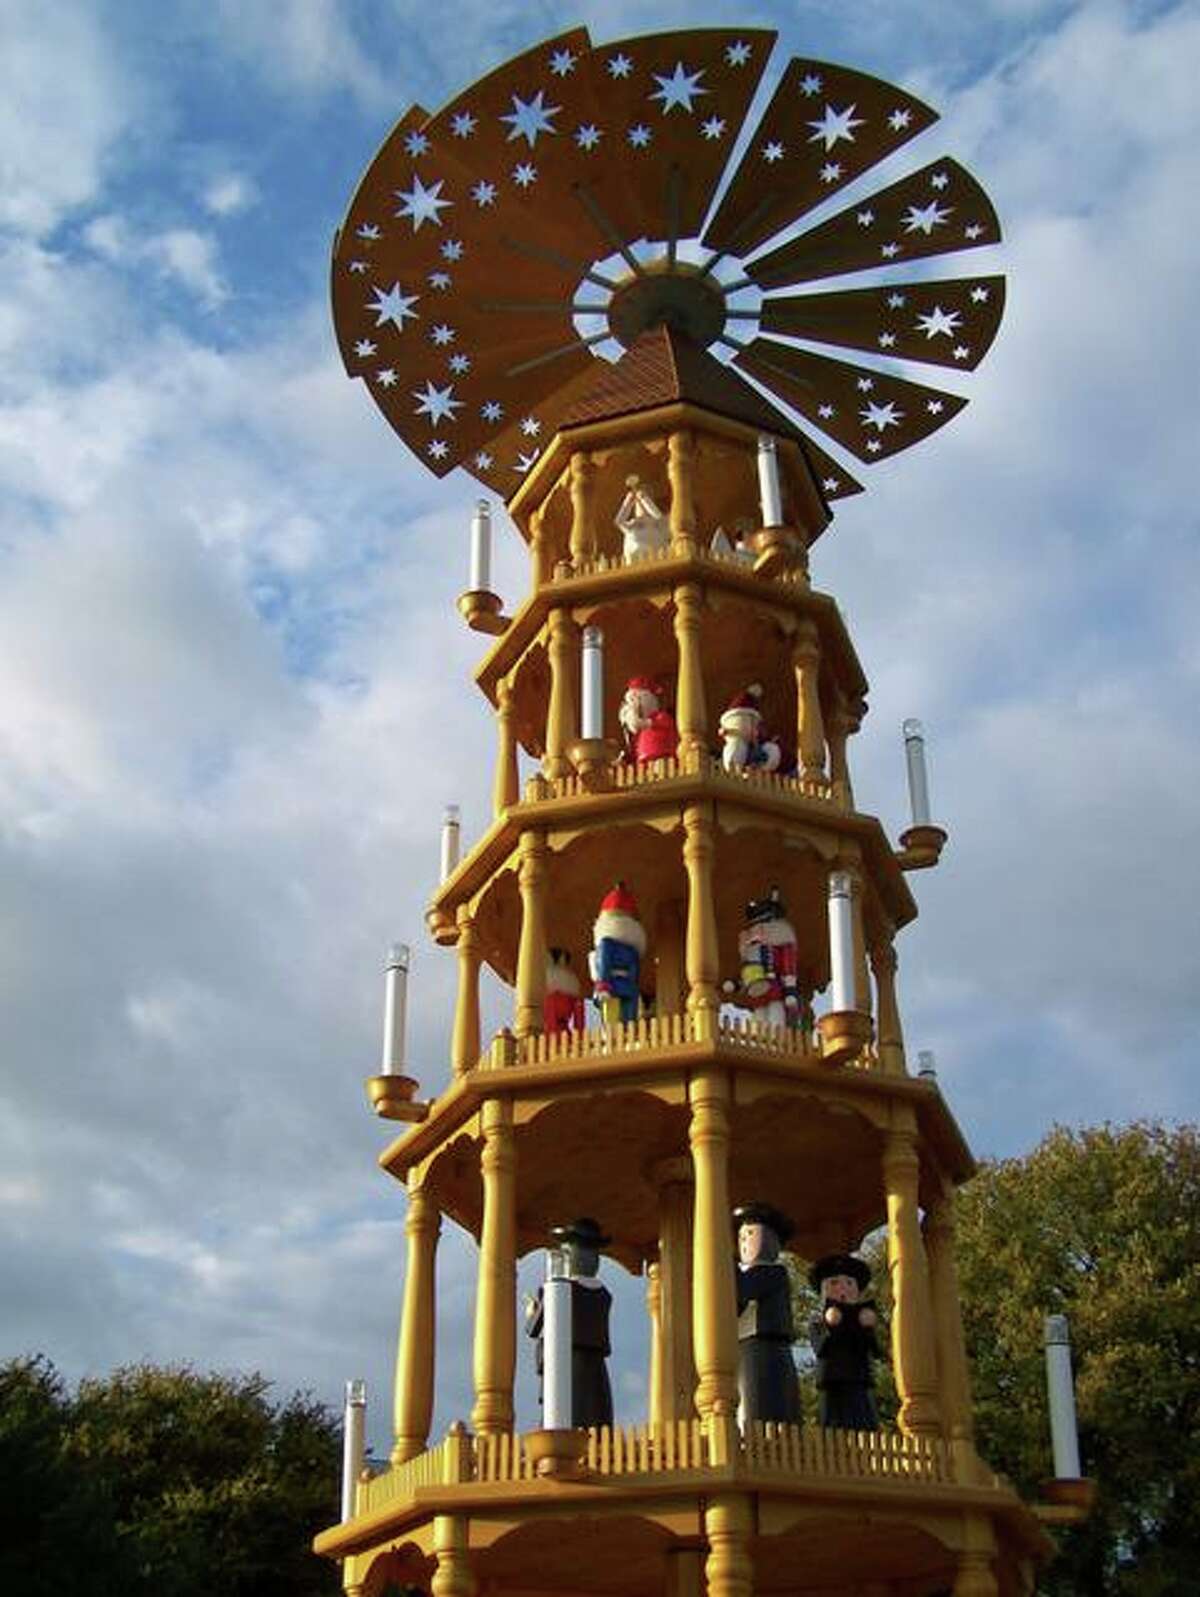 Fredericksburg's German Pyramid will be lighted on Friday, Nov. 23, along with the Community Christmas Tree at Marktplatz, setting the stage for a month full of events with a German flavor in the Hill Country town.